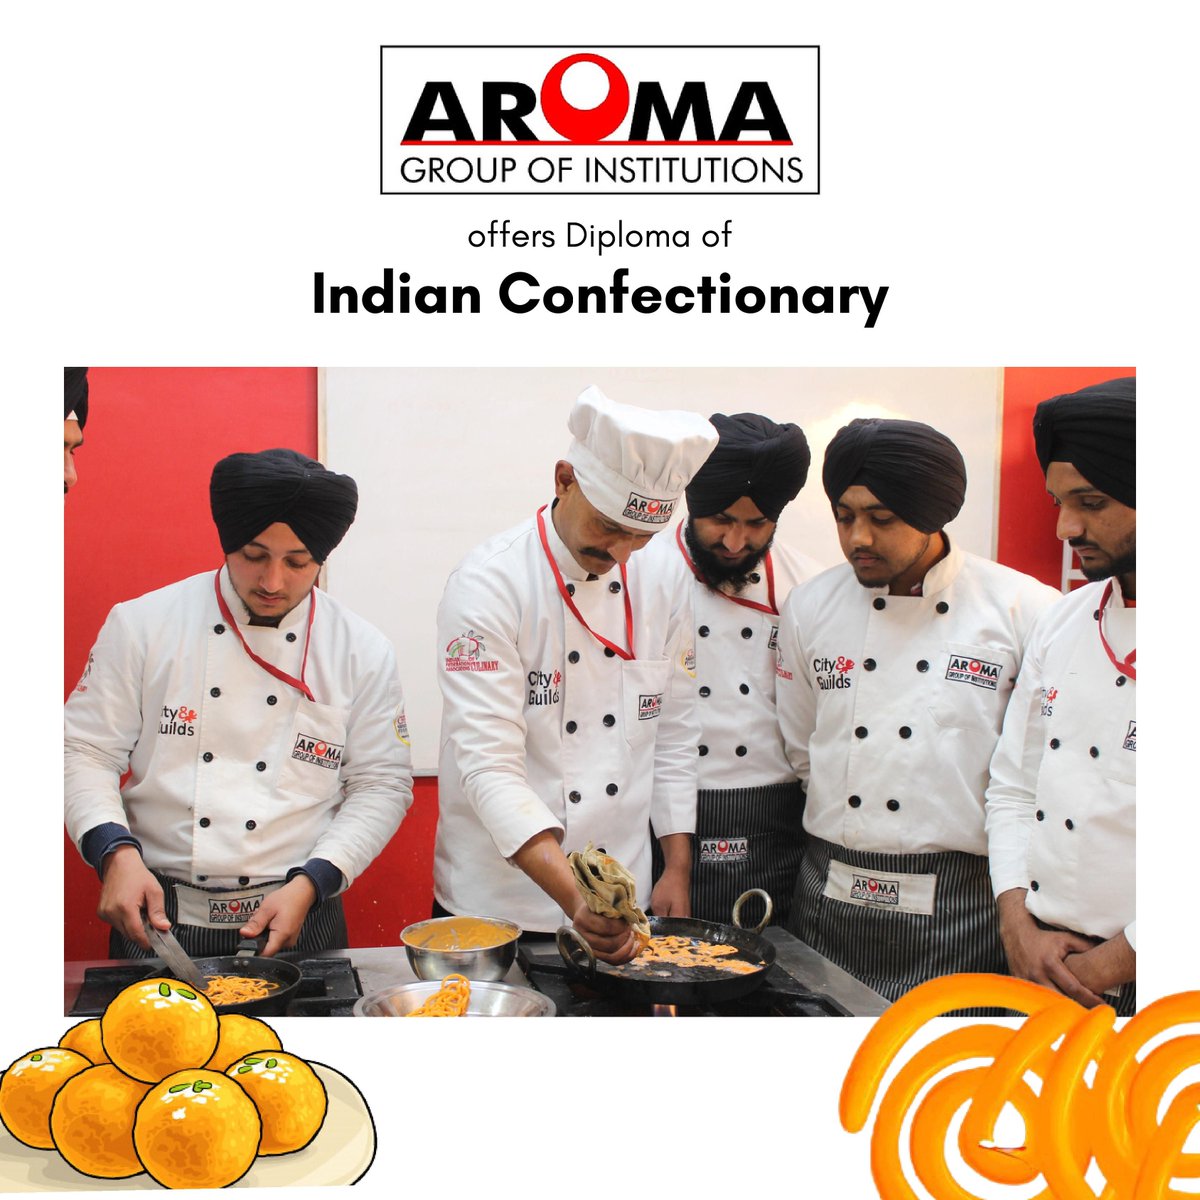 #Never_Underestimate_a_Halwai
Join Diploma of Indian Confectioners and learn Traditional & Modern Indian Sweets.
For admissions call 9888196789
#AromaInstitute #AromaAcademy #AromaGroupofInstitutions #IndianSweets #IndianConfectoners #Halwai #BestCookingAcademy #BestIndianCooking